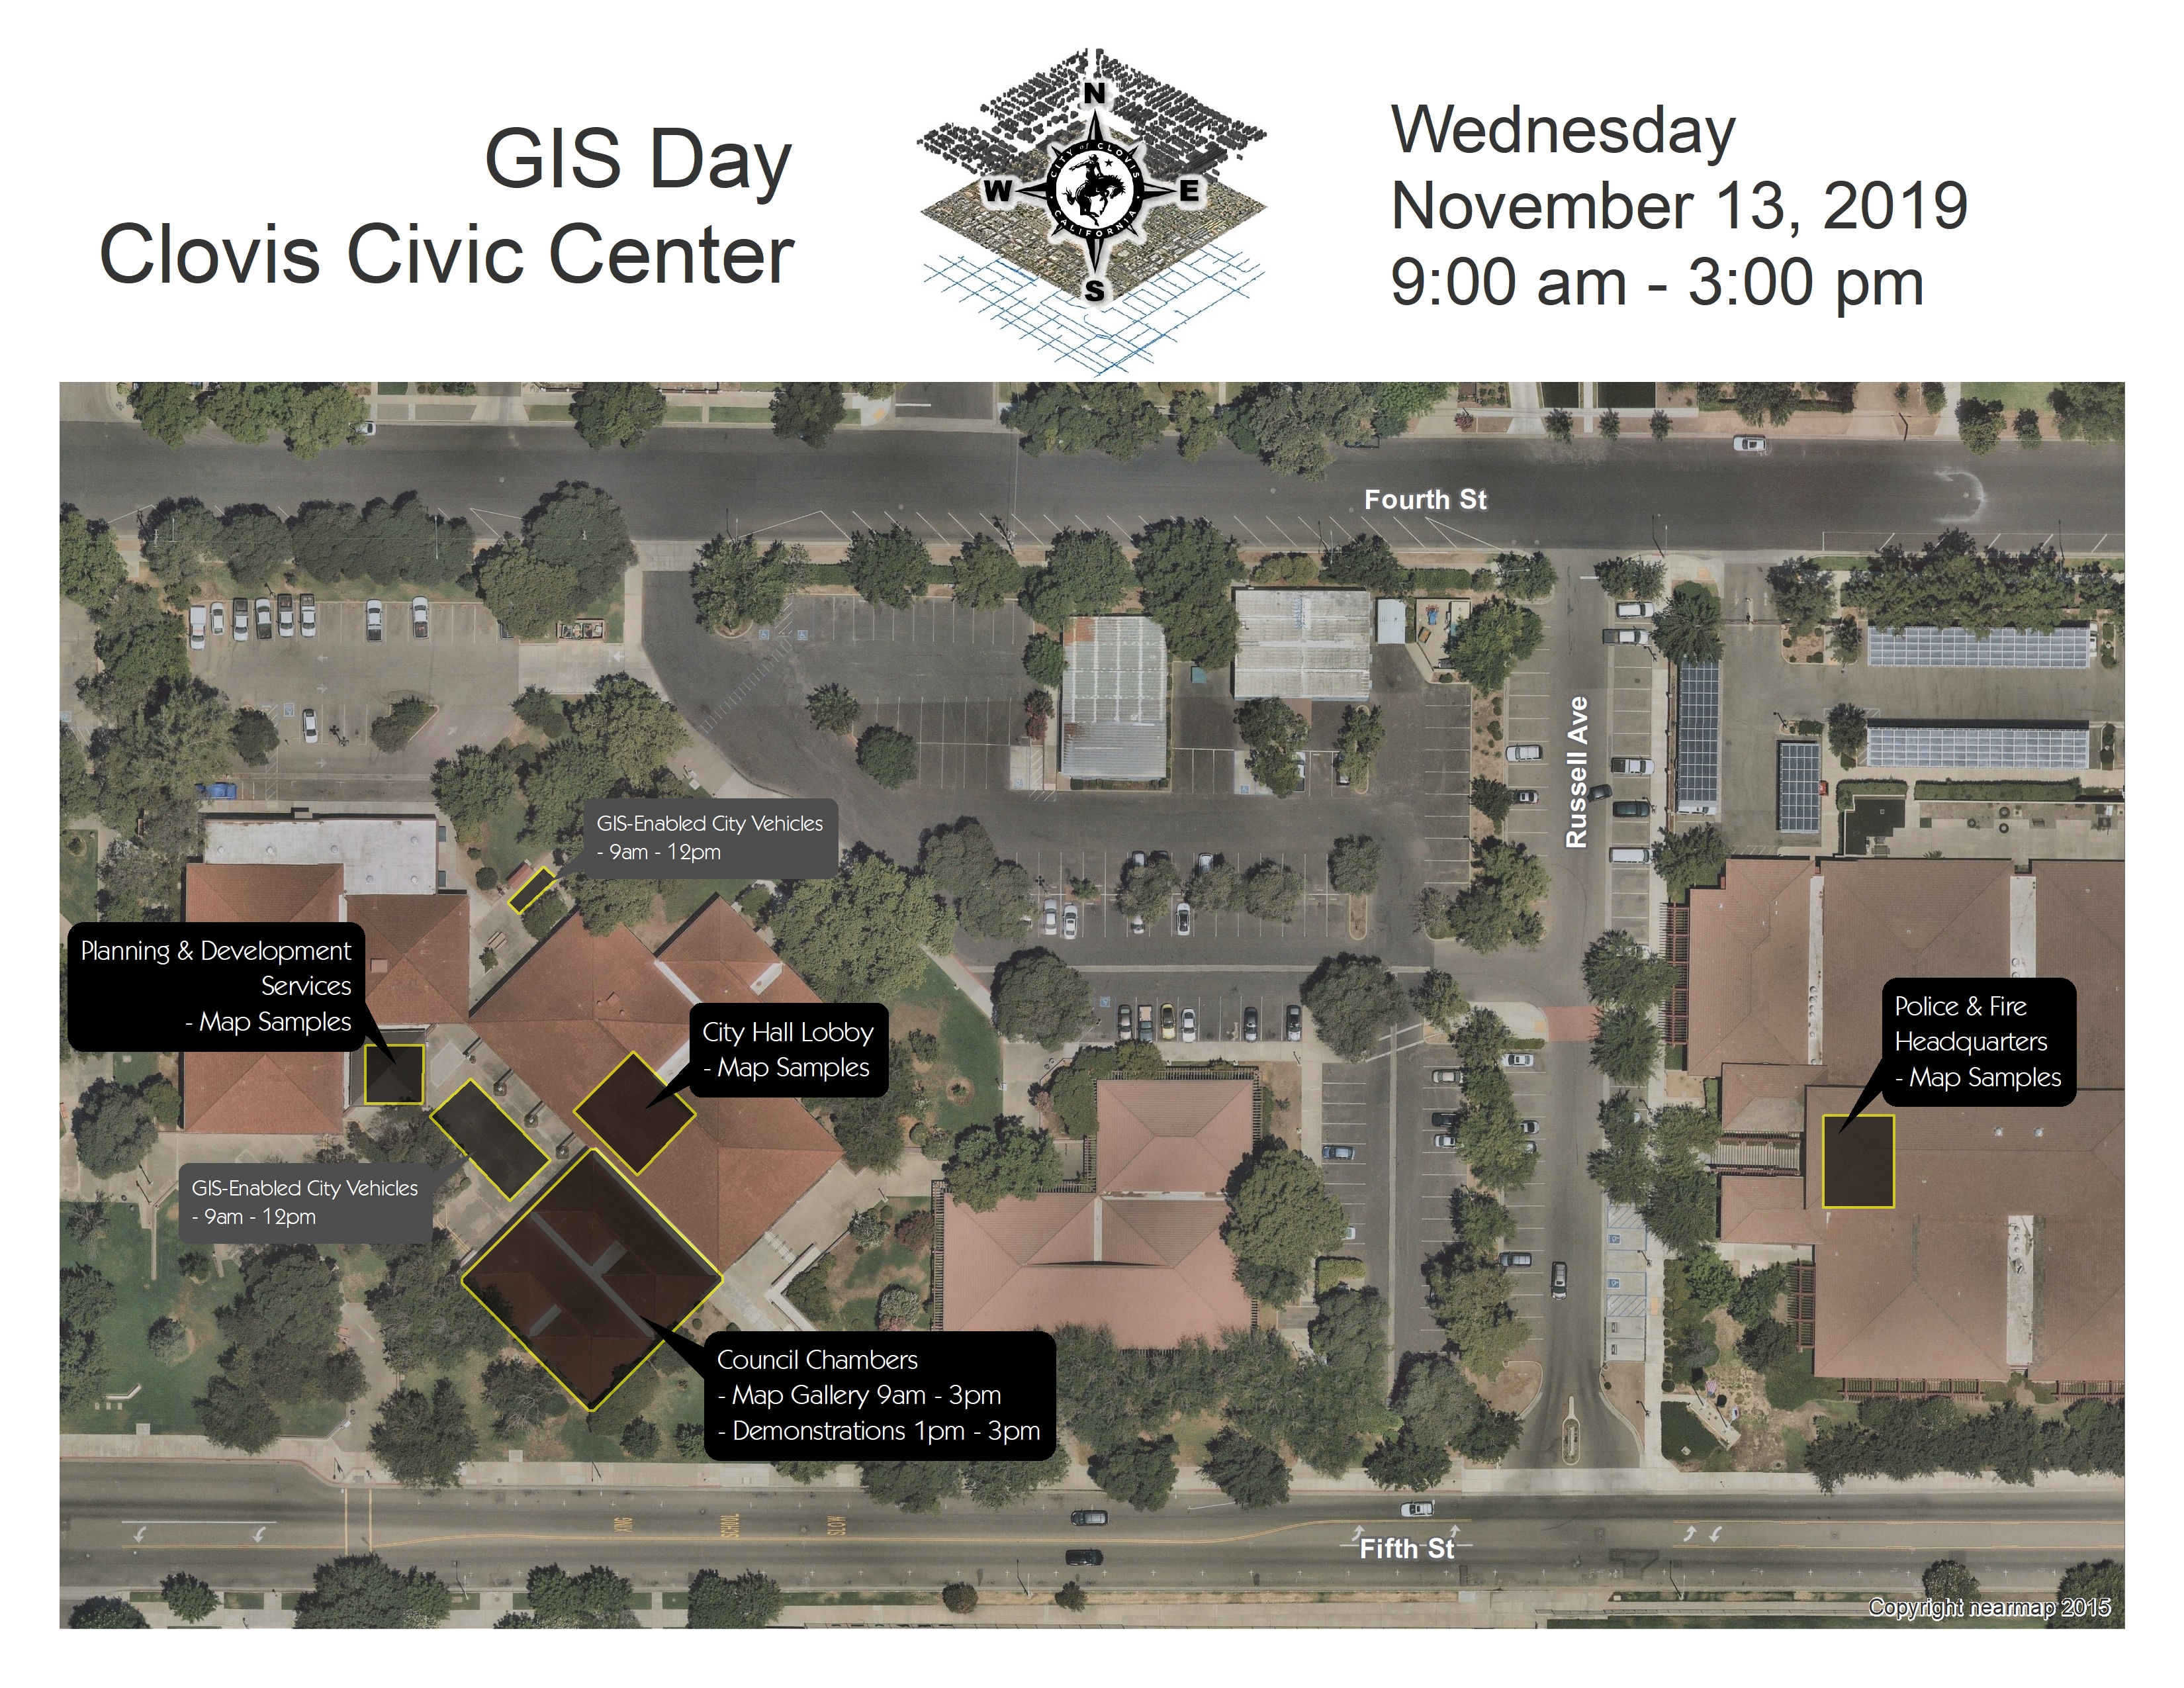 Map of GIS Day Events